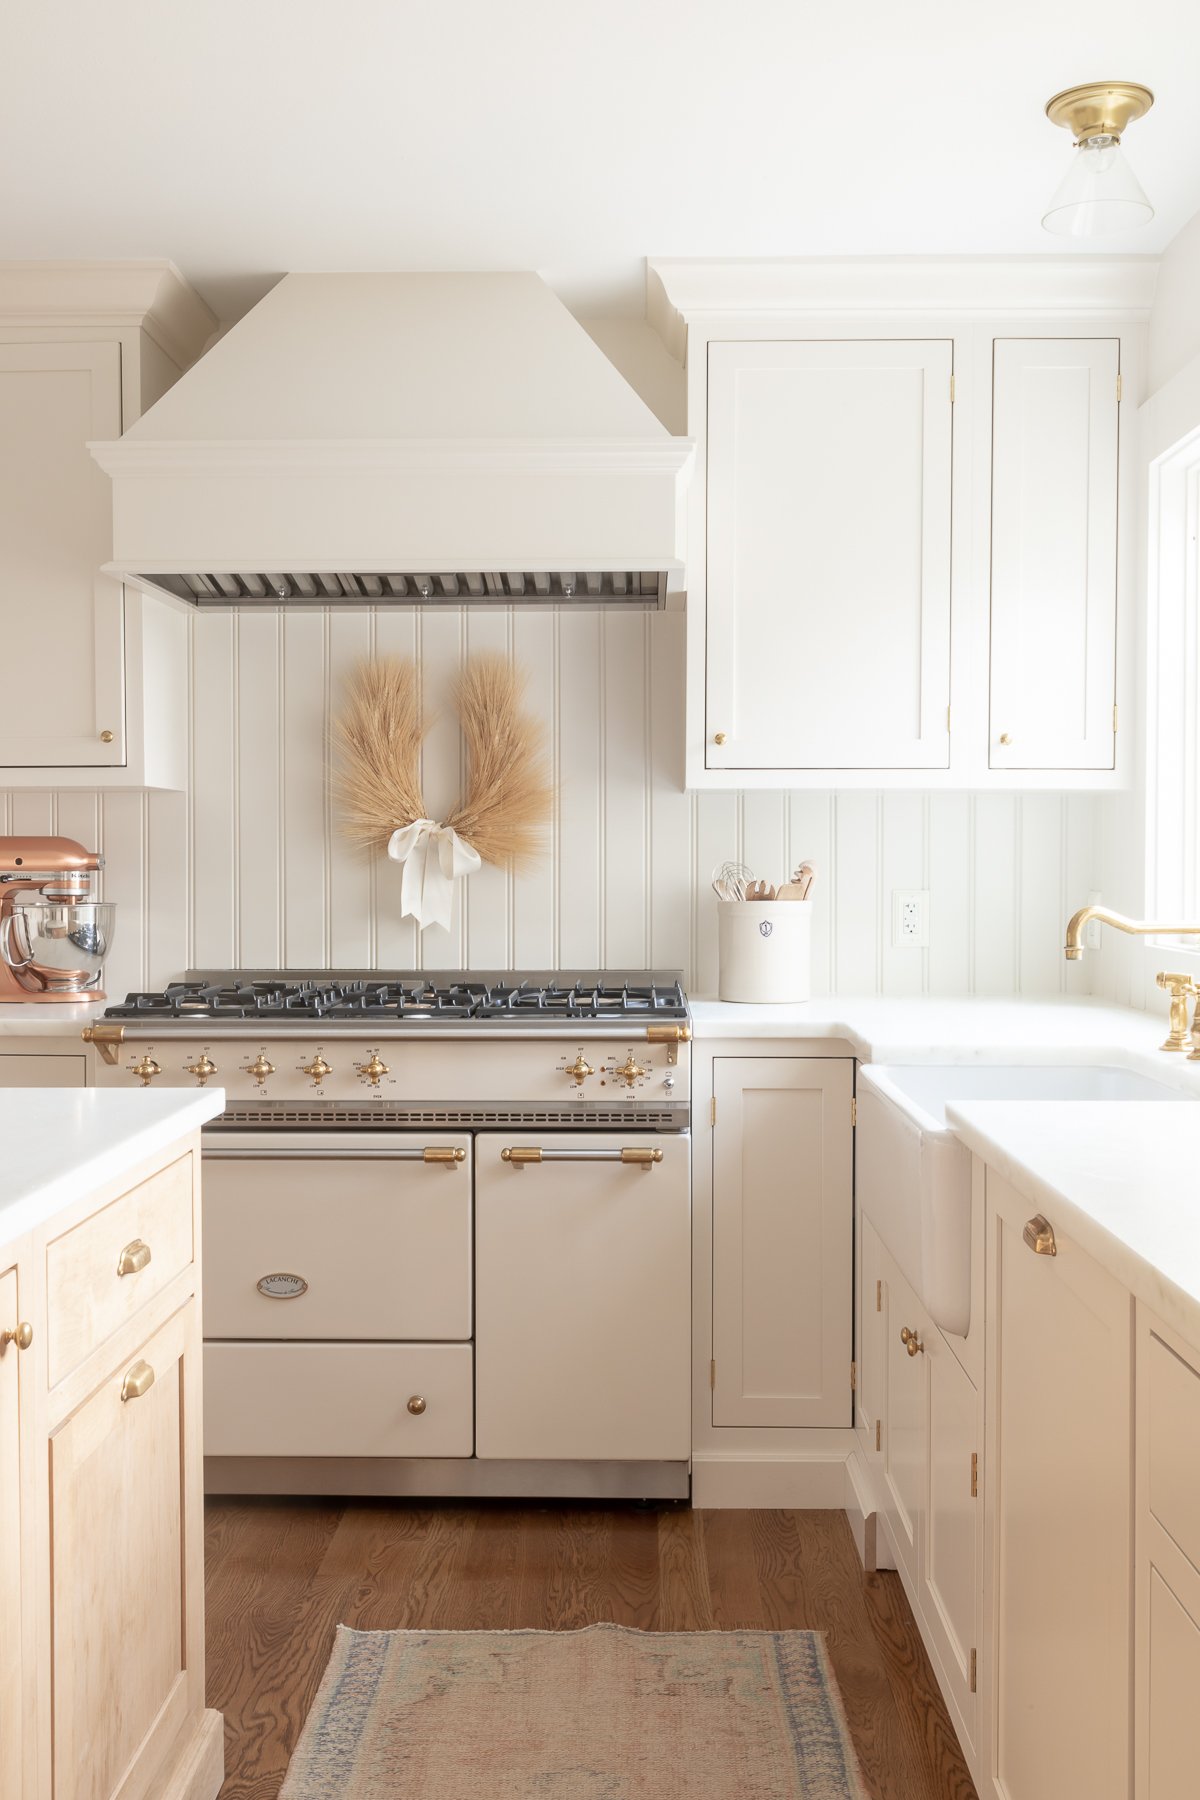 A kitchen with white cabinets and gold laurel wreaths accents.